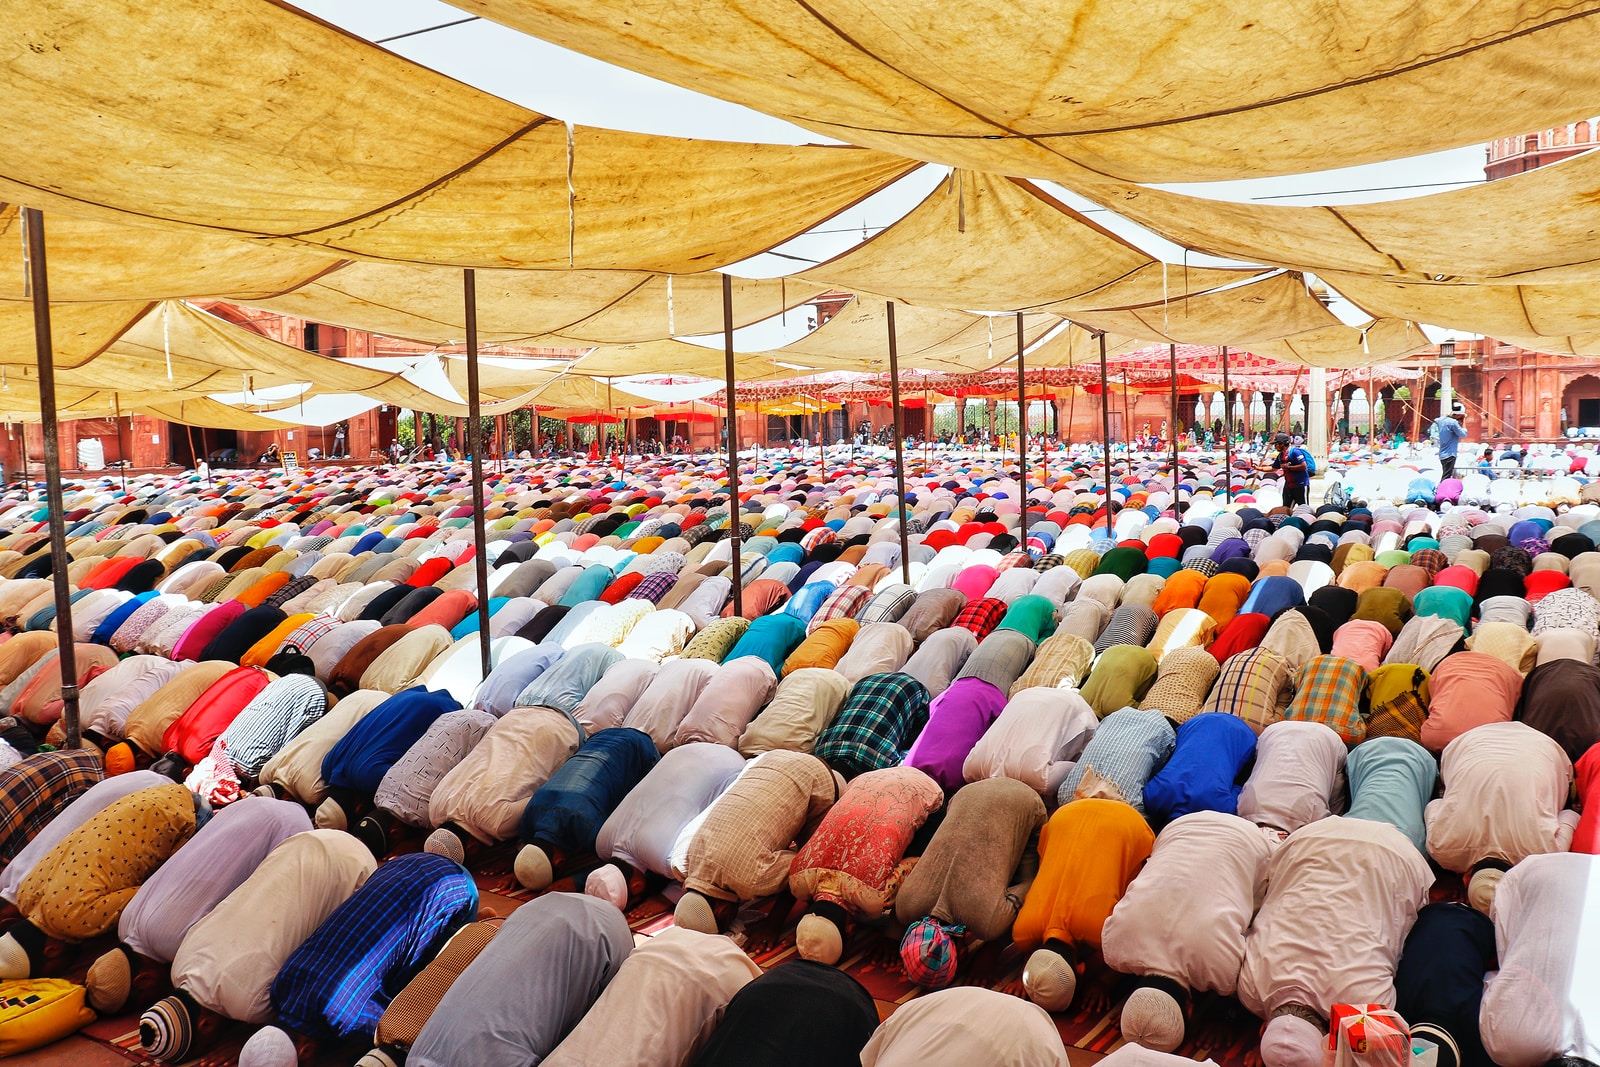 people bowing down inside canopy during day